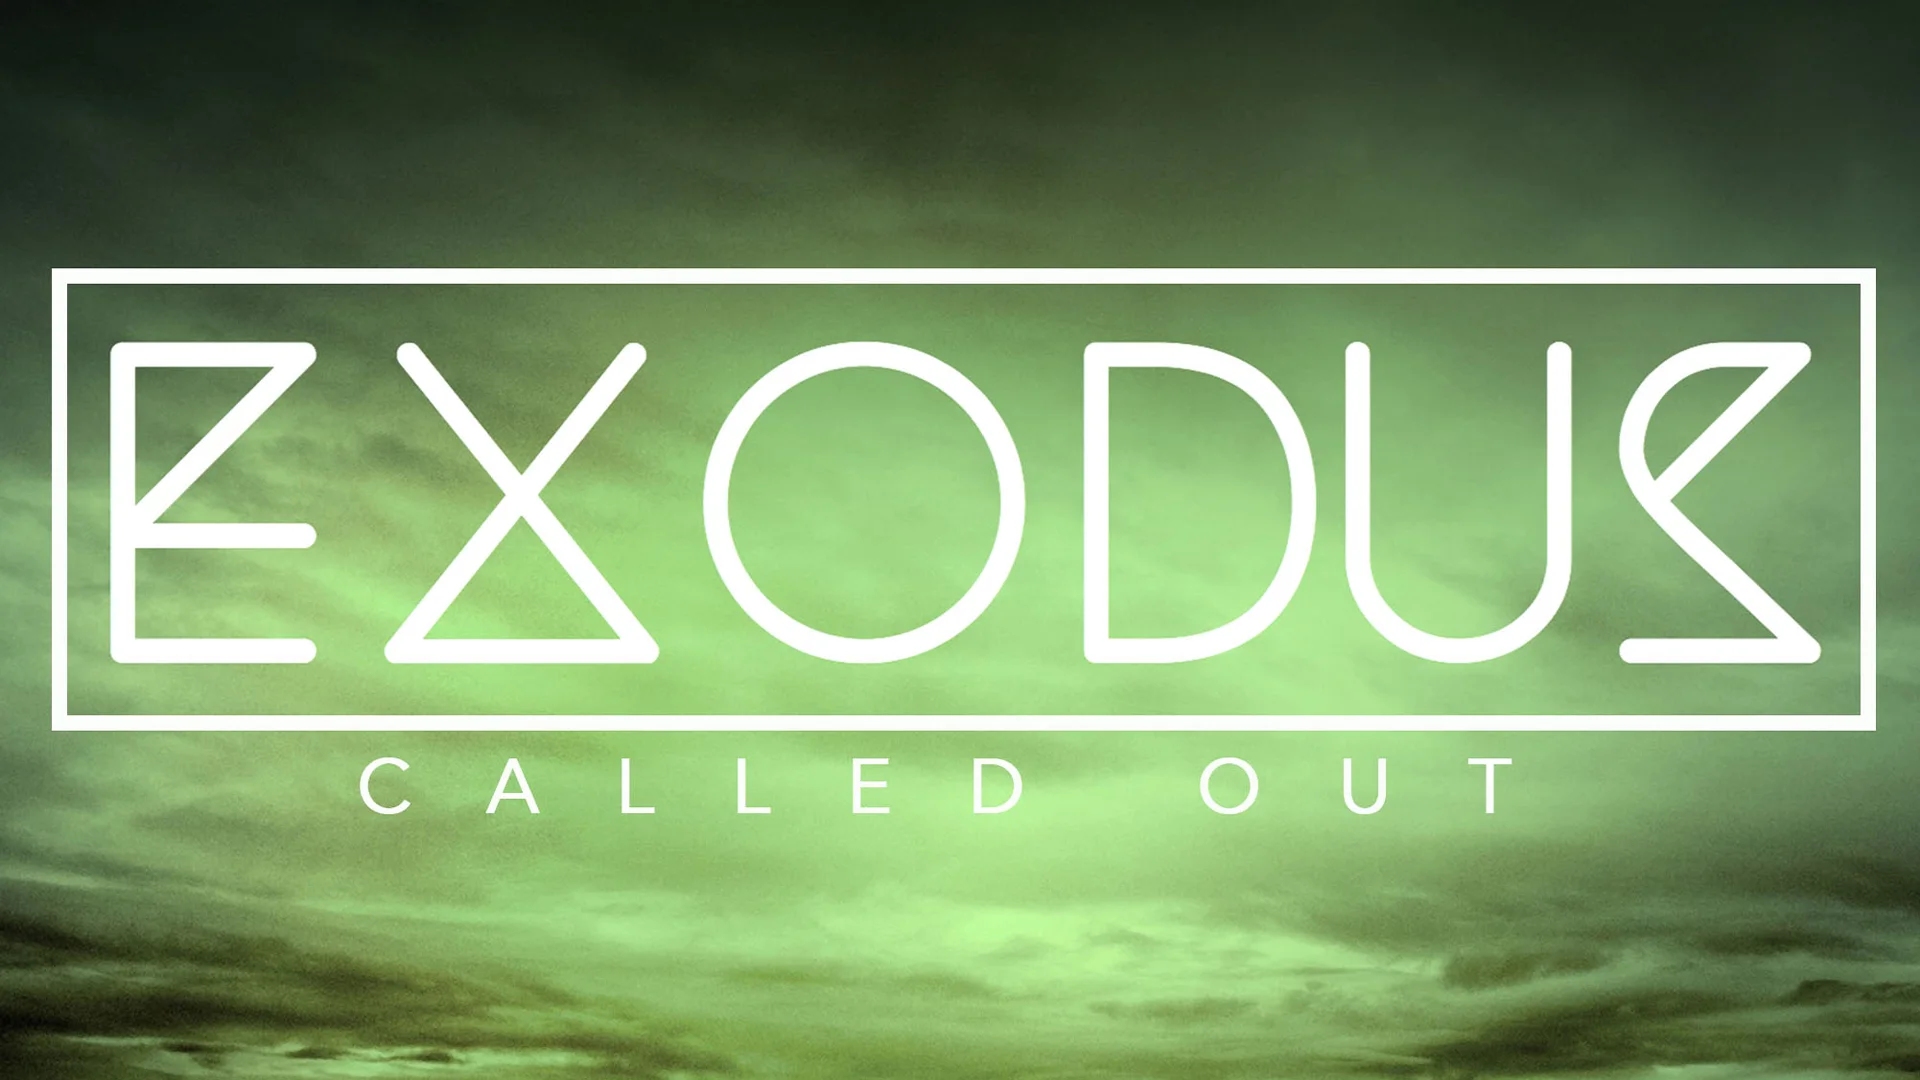 Exodus: Called Out